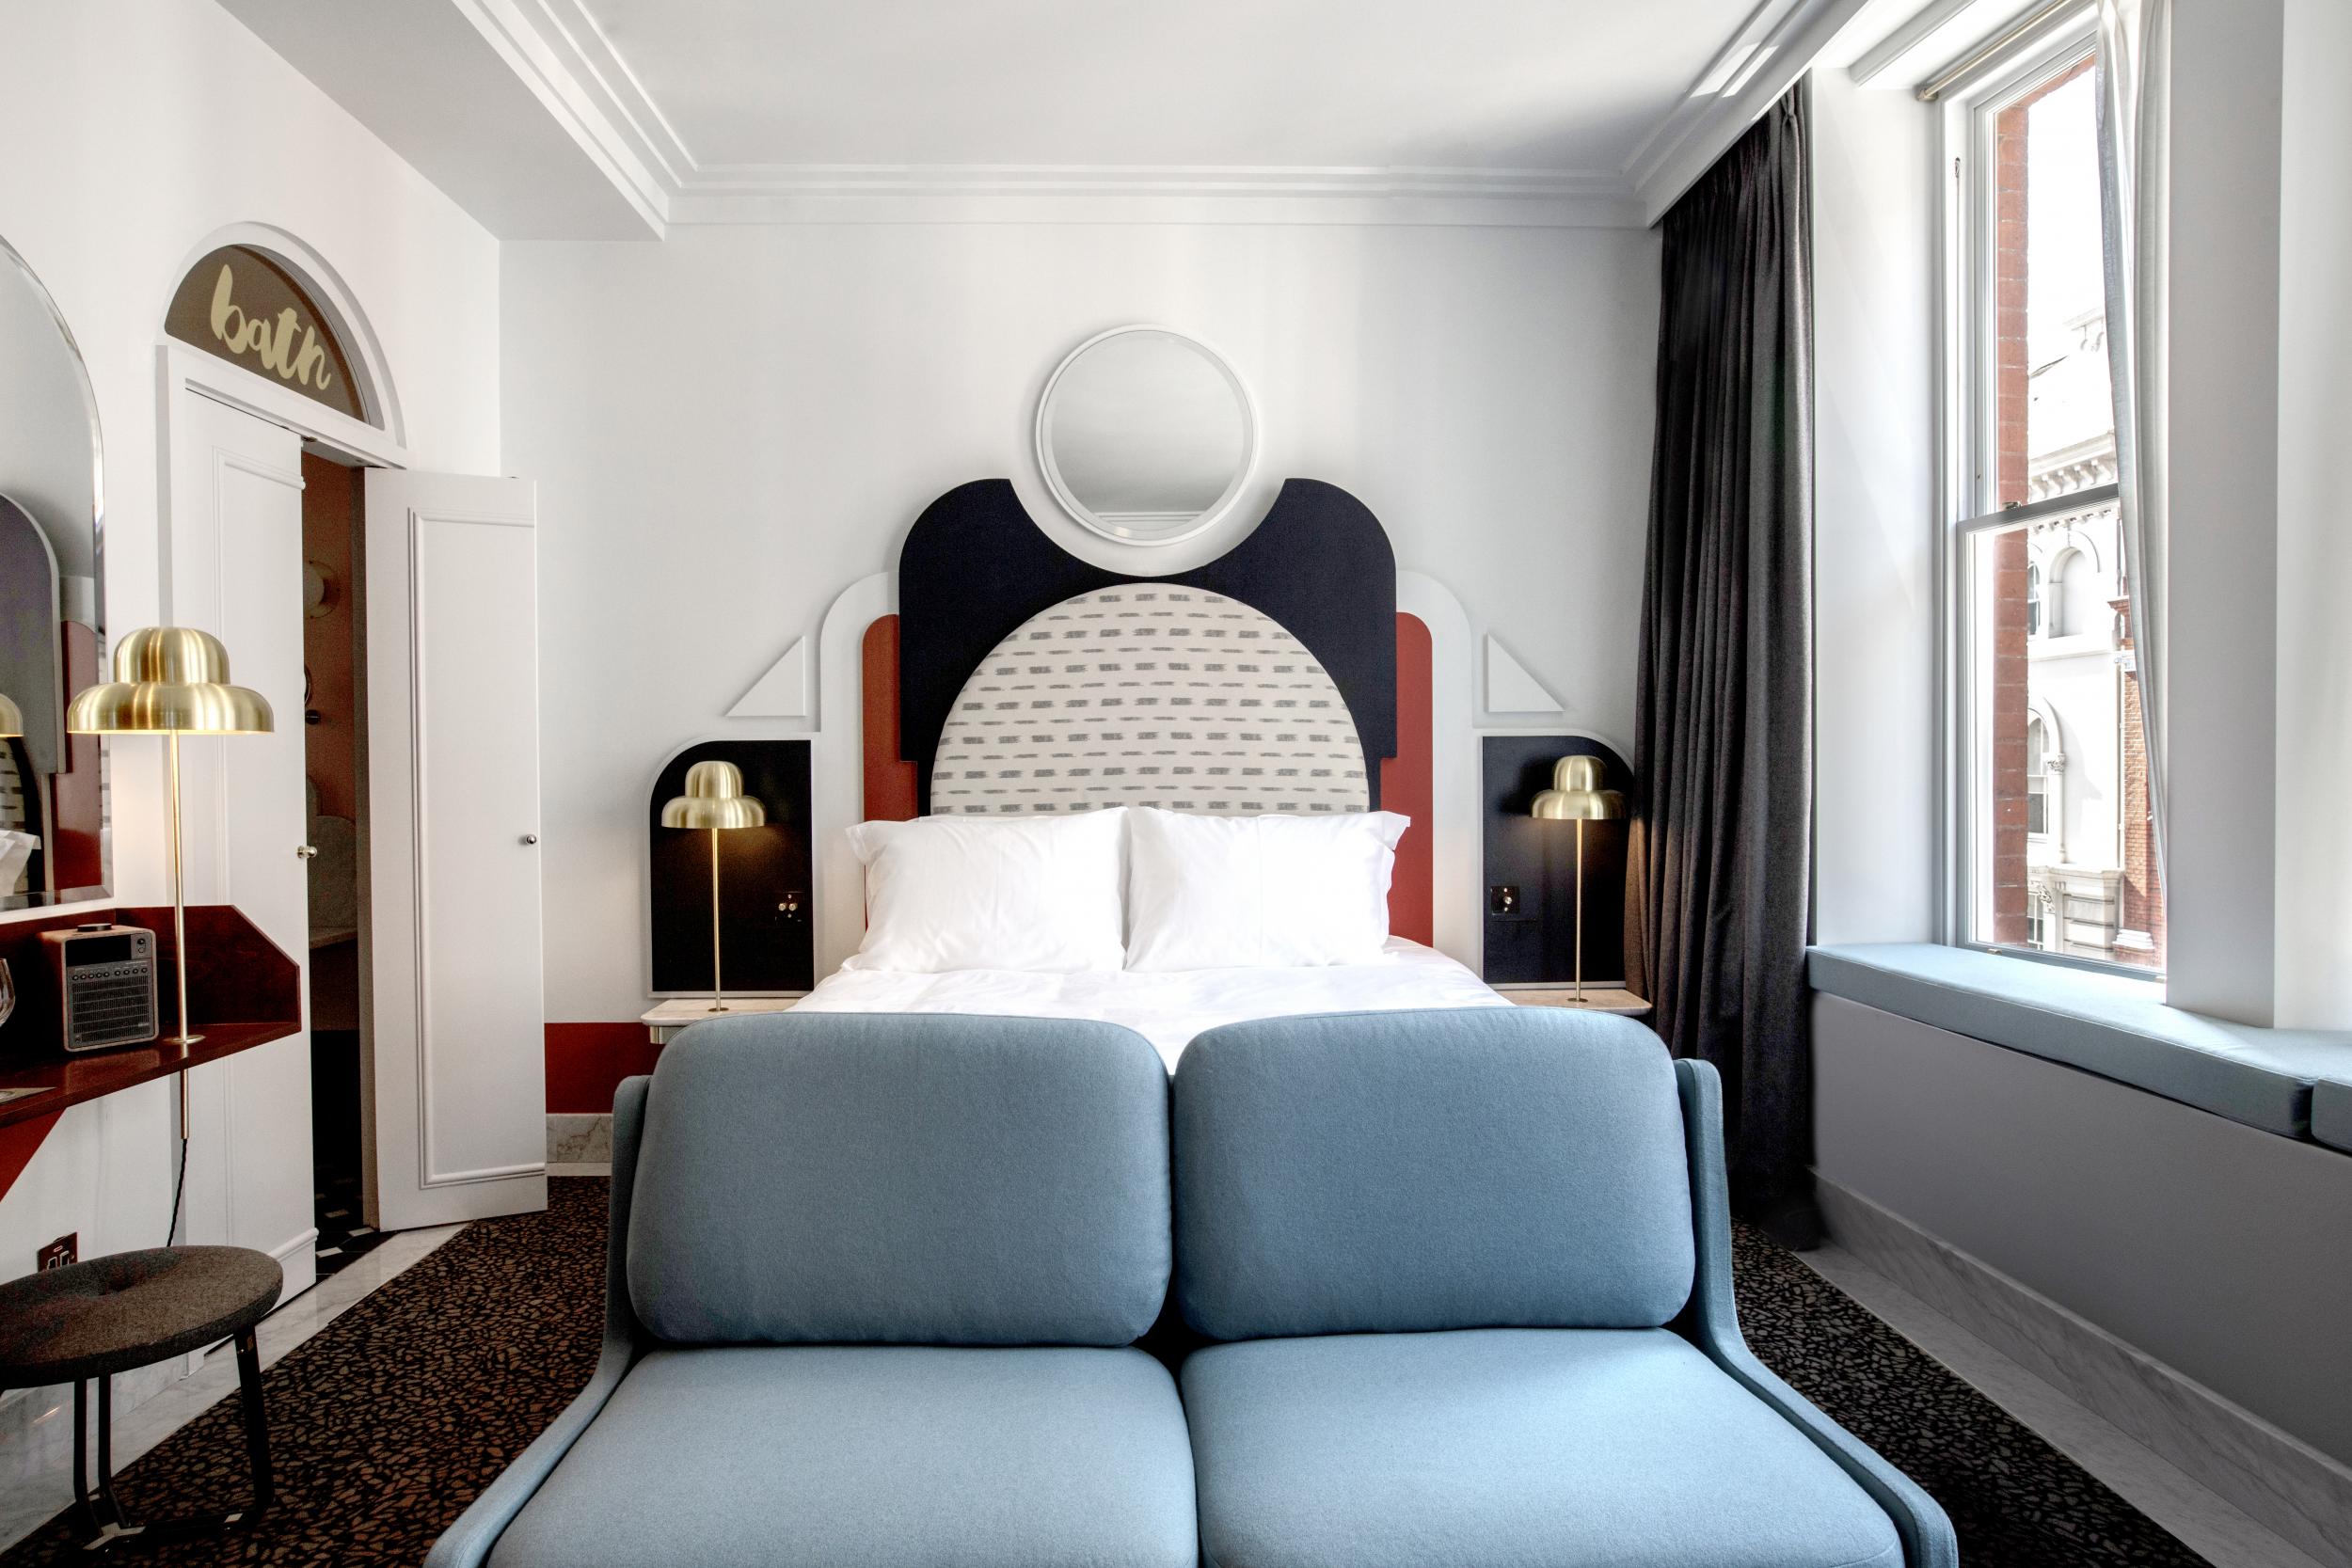 The stylish Henrietta Hotel is well located for Theatreland